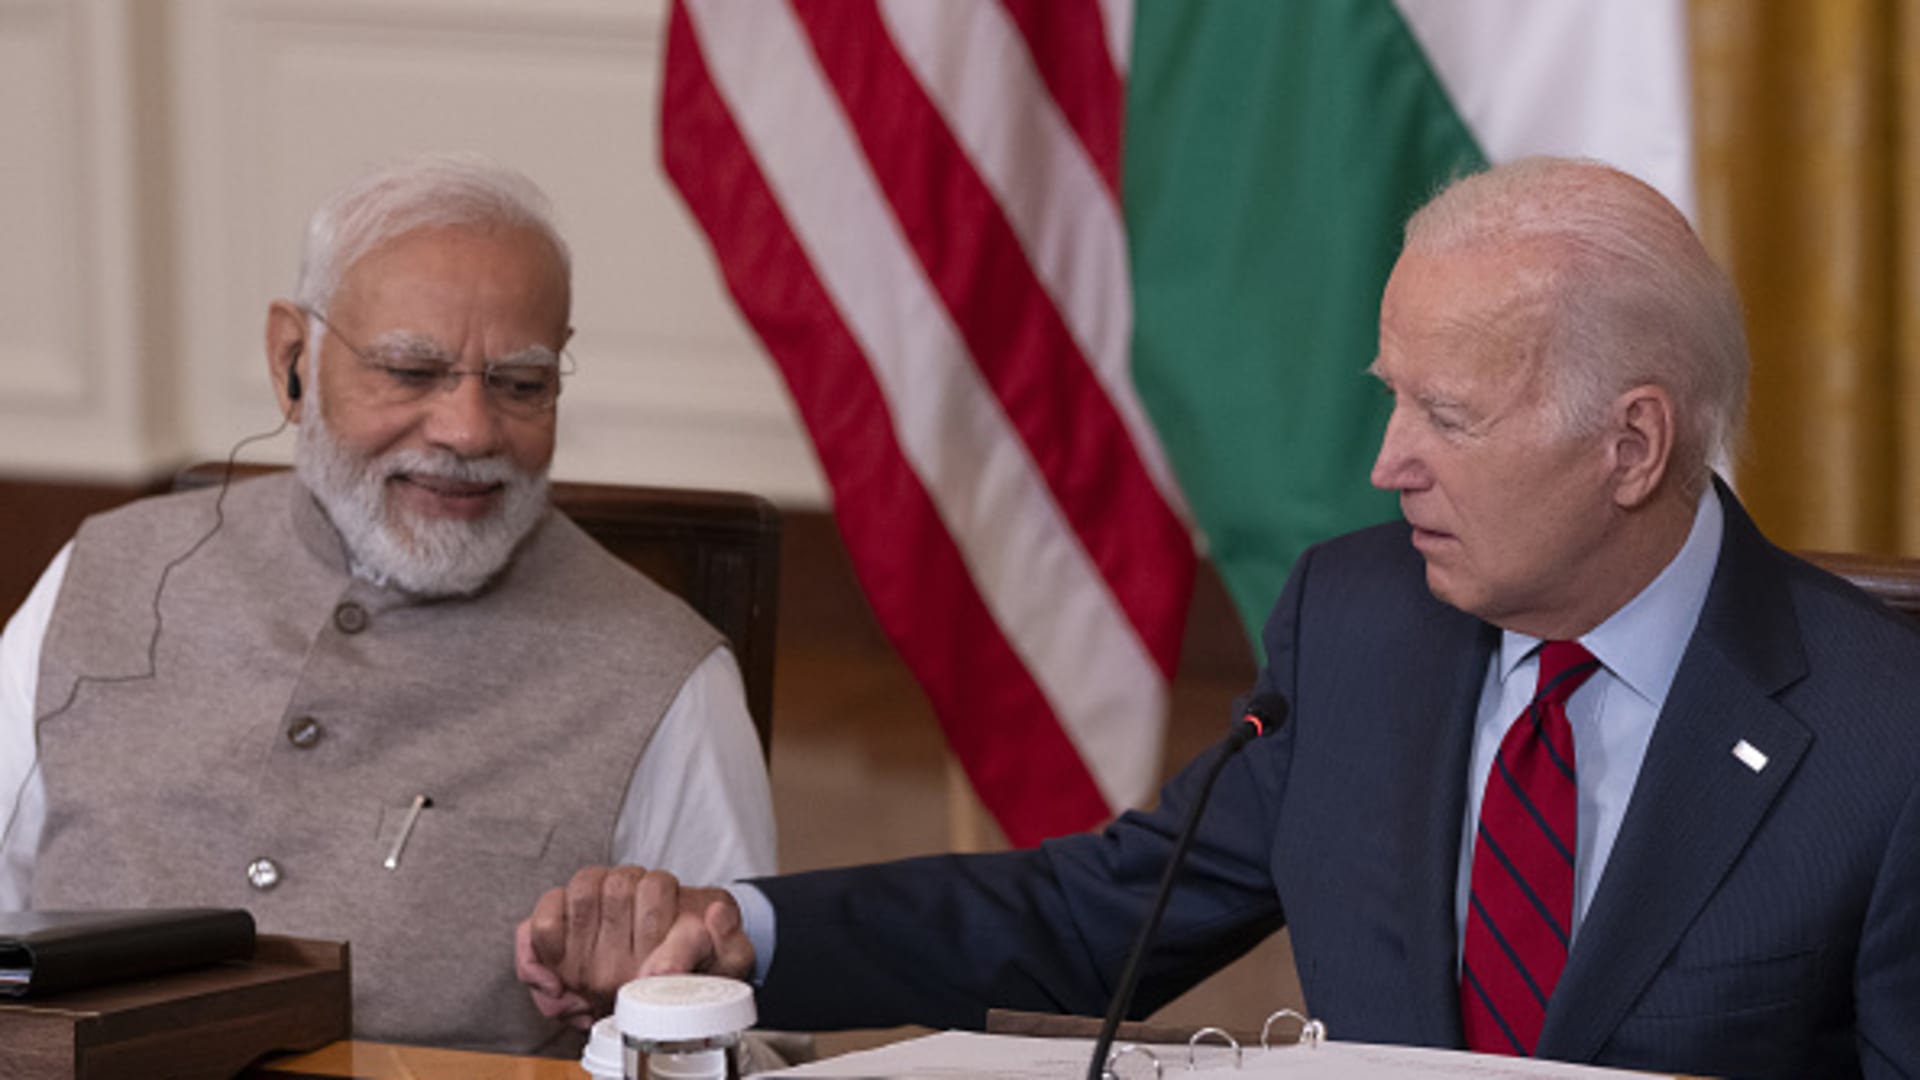 India’s ‘freedom’ takes precedence over being a U.S. ally, says think tank 